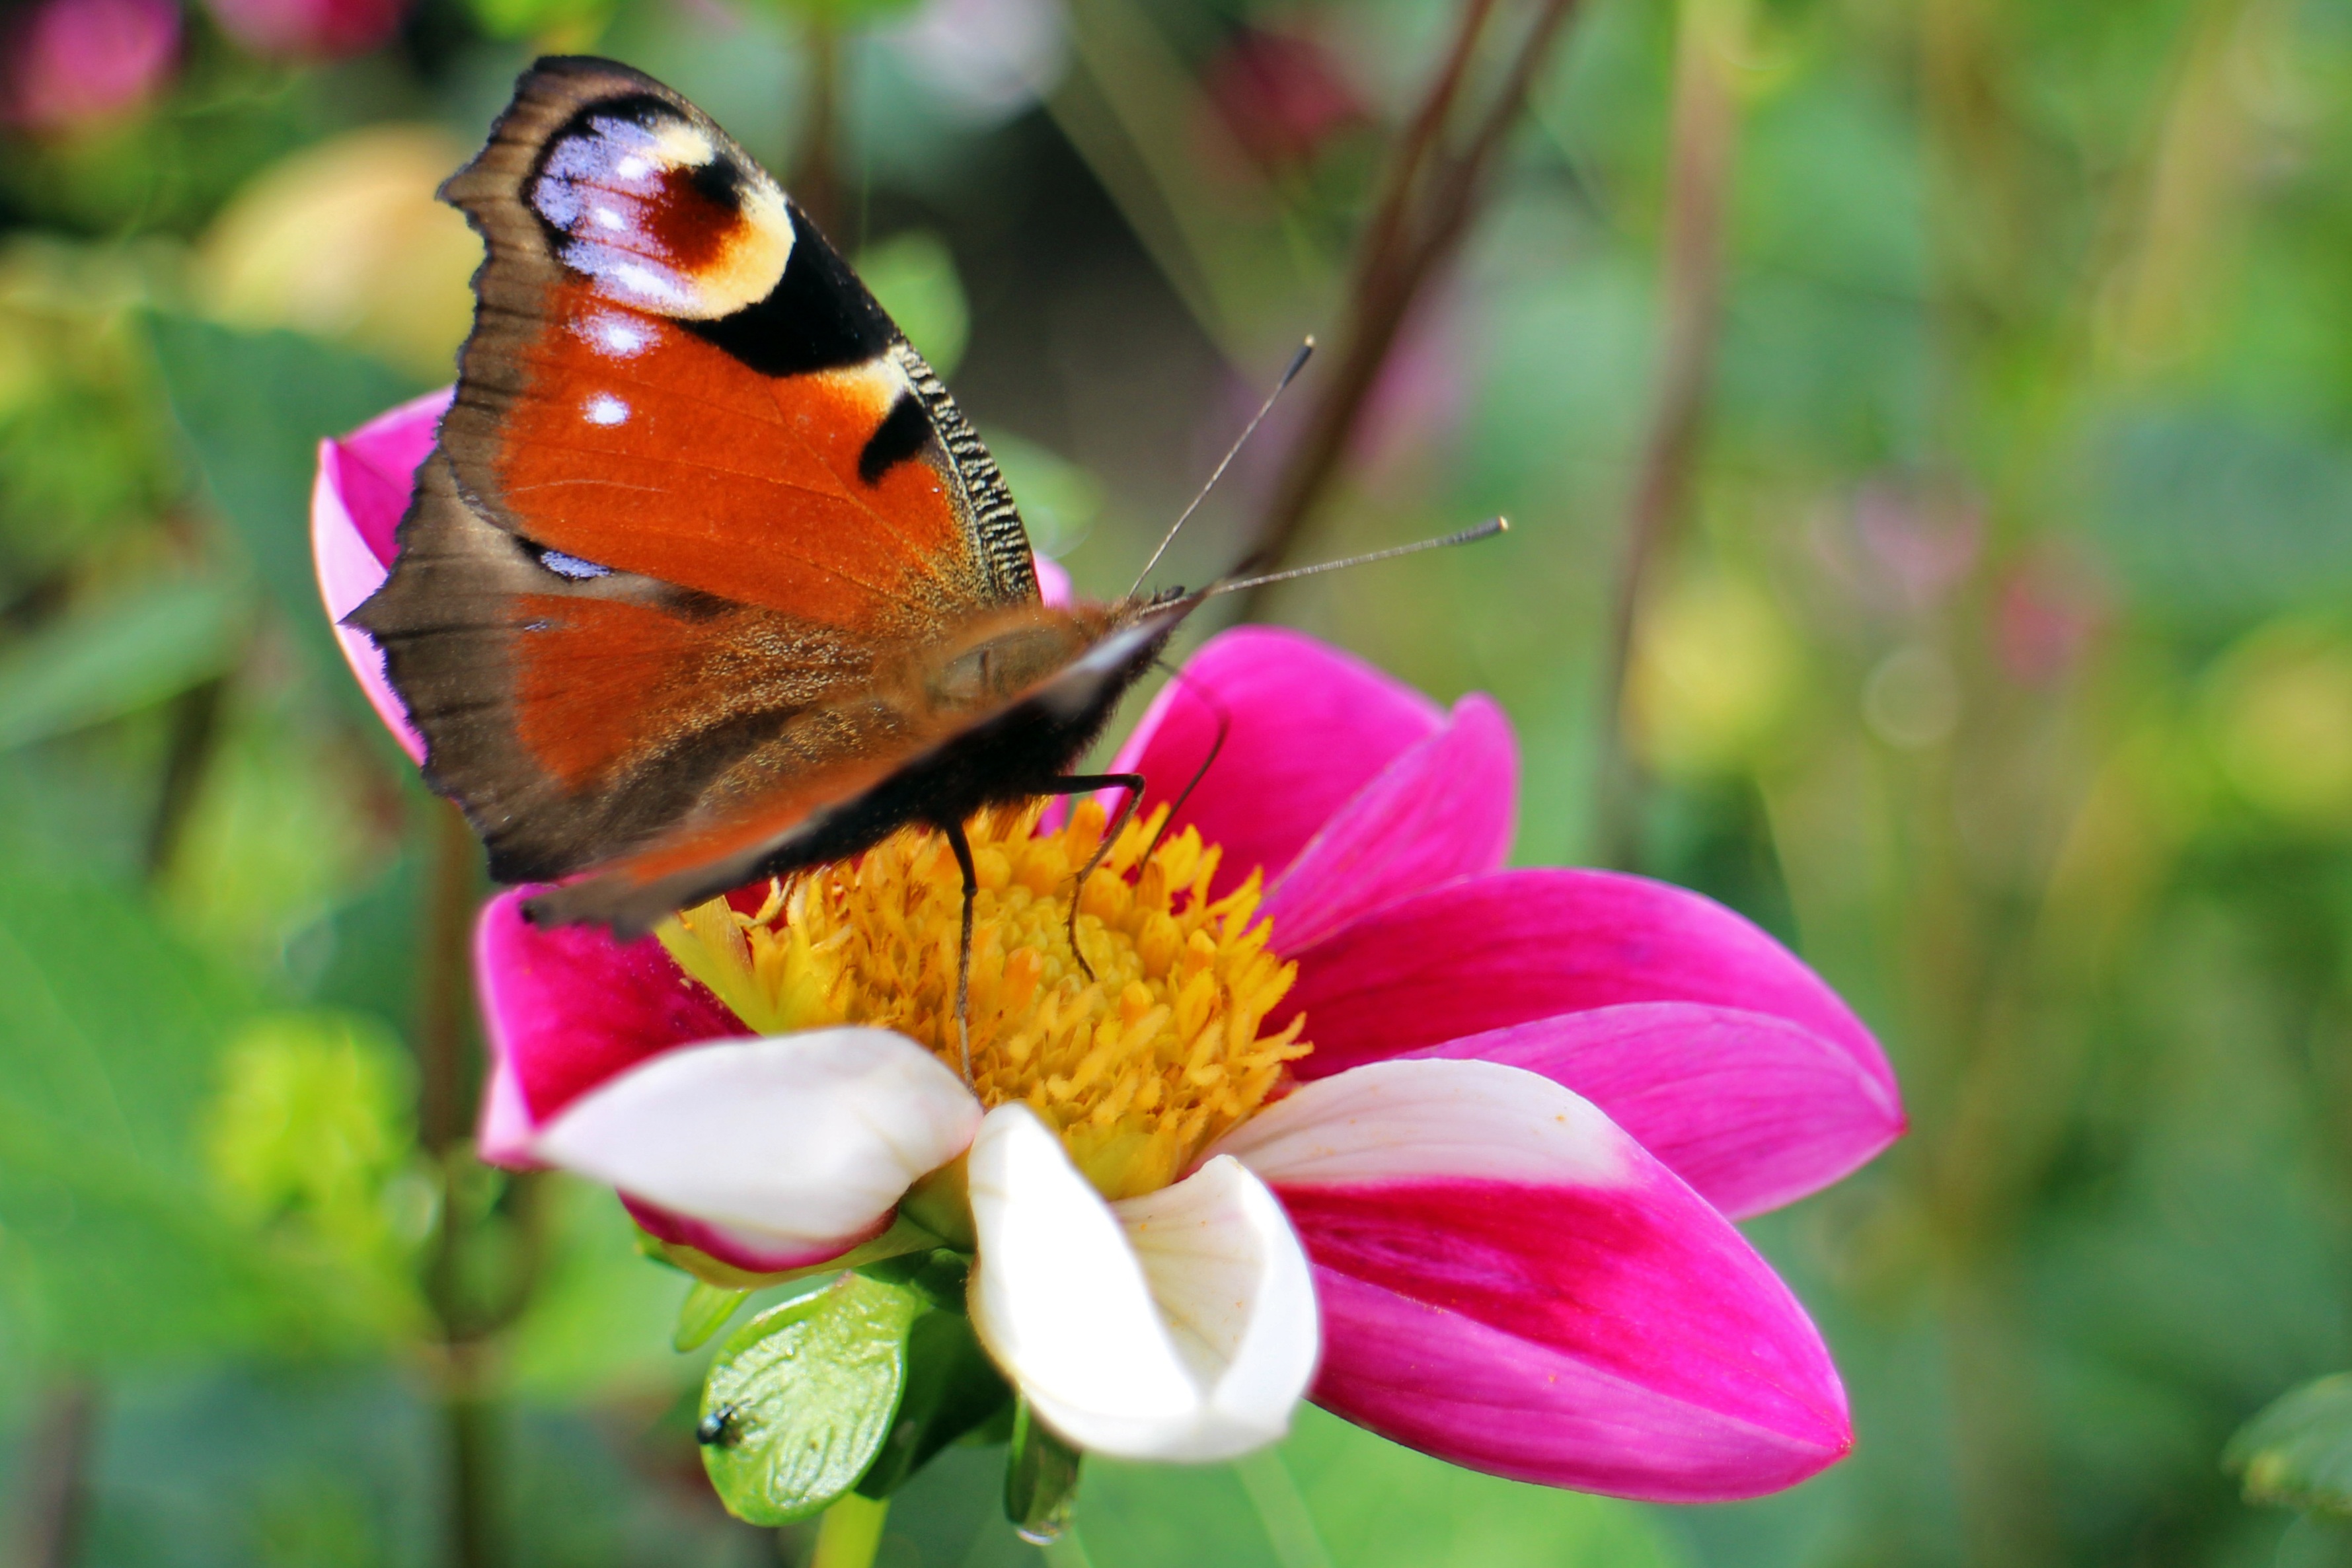 Butterfly on the yellow center of a pink flower free image download